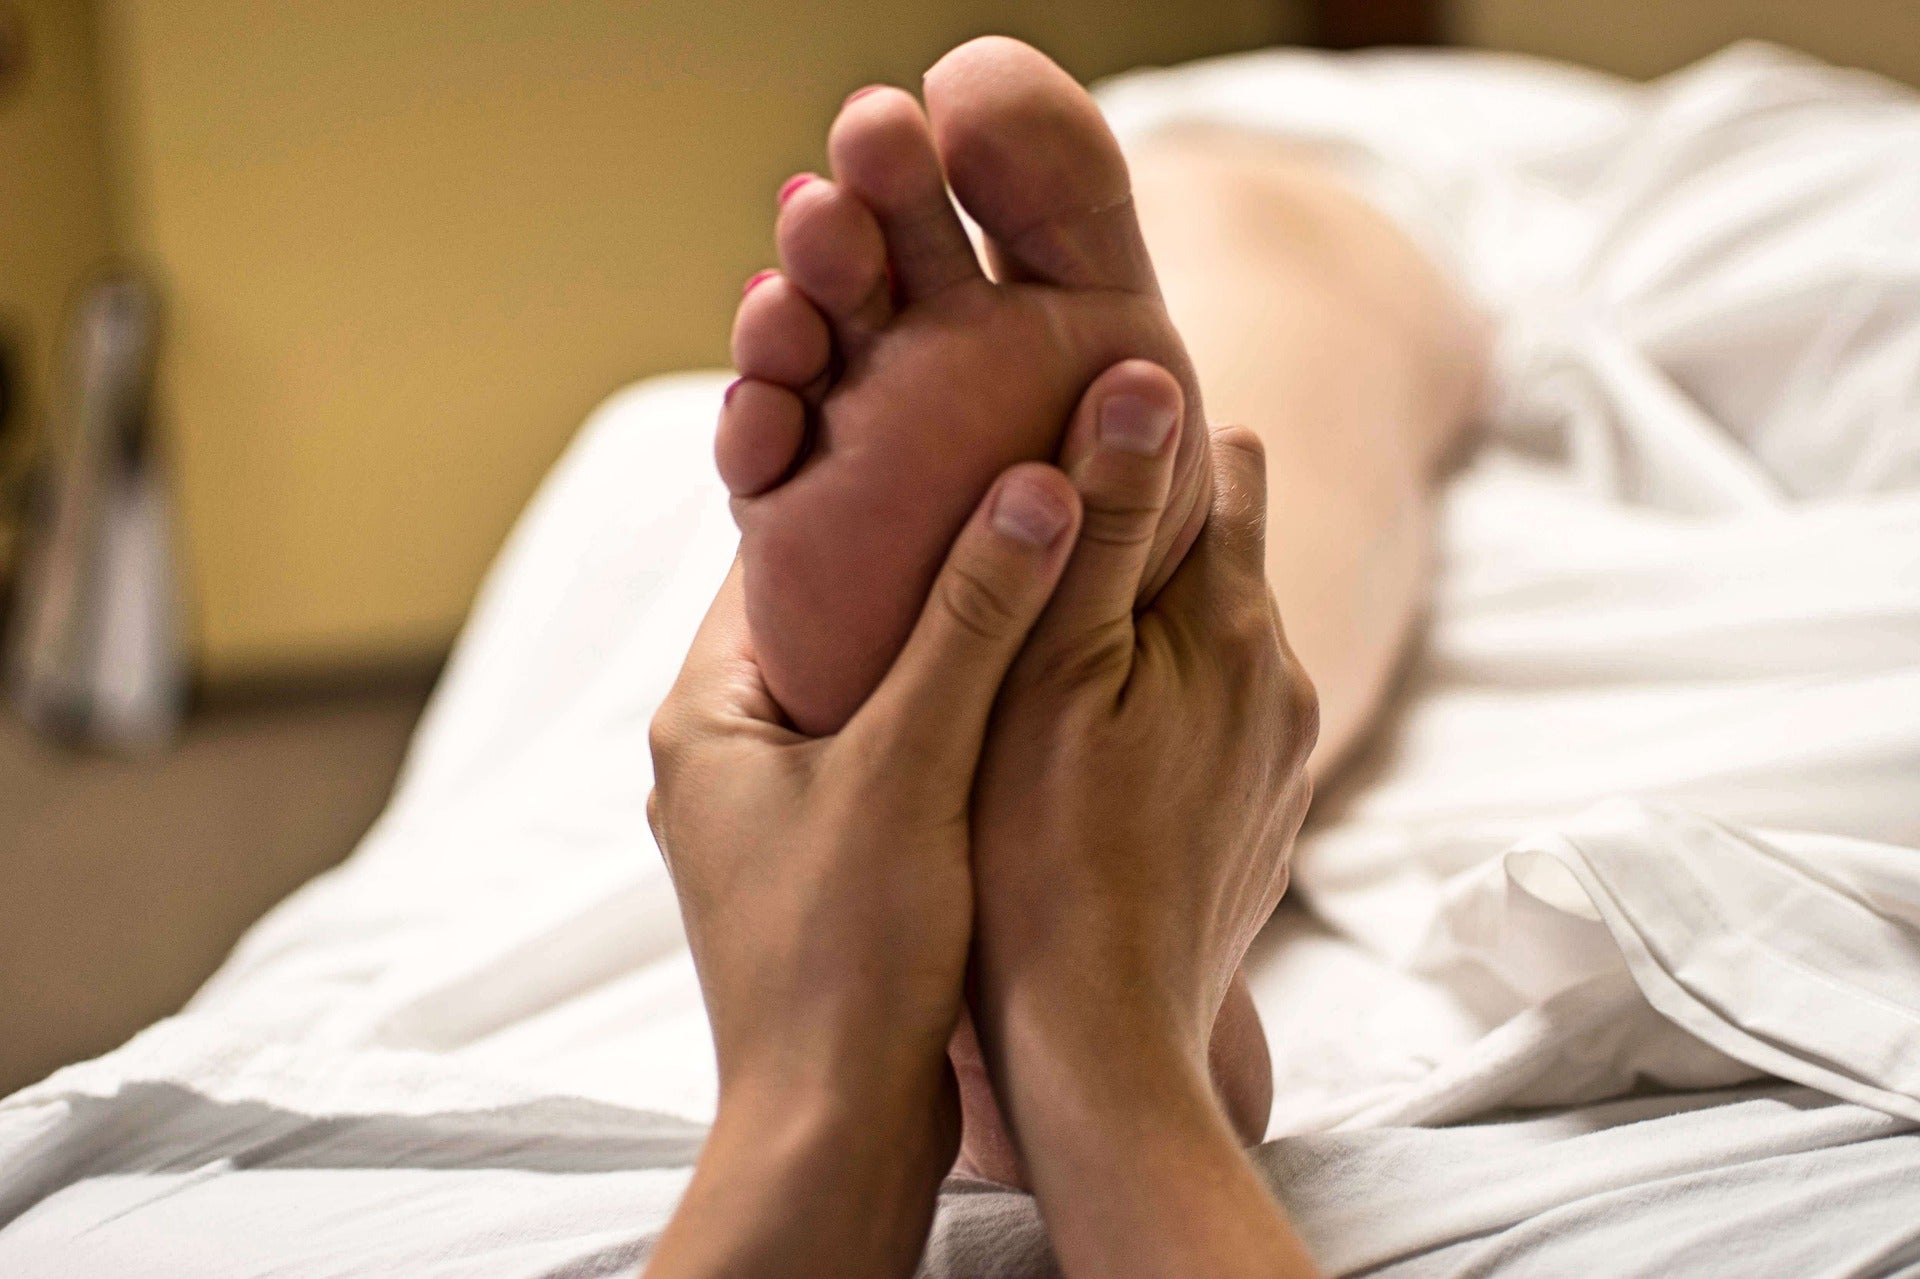 5 Signs That Your Body is Responding to Reflexology Work